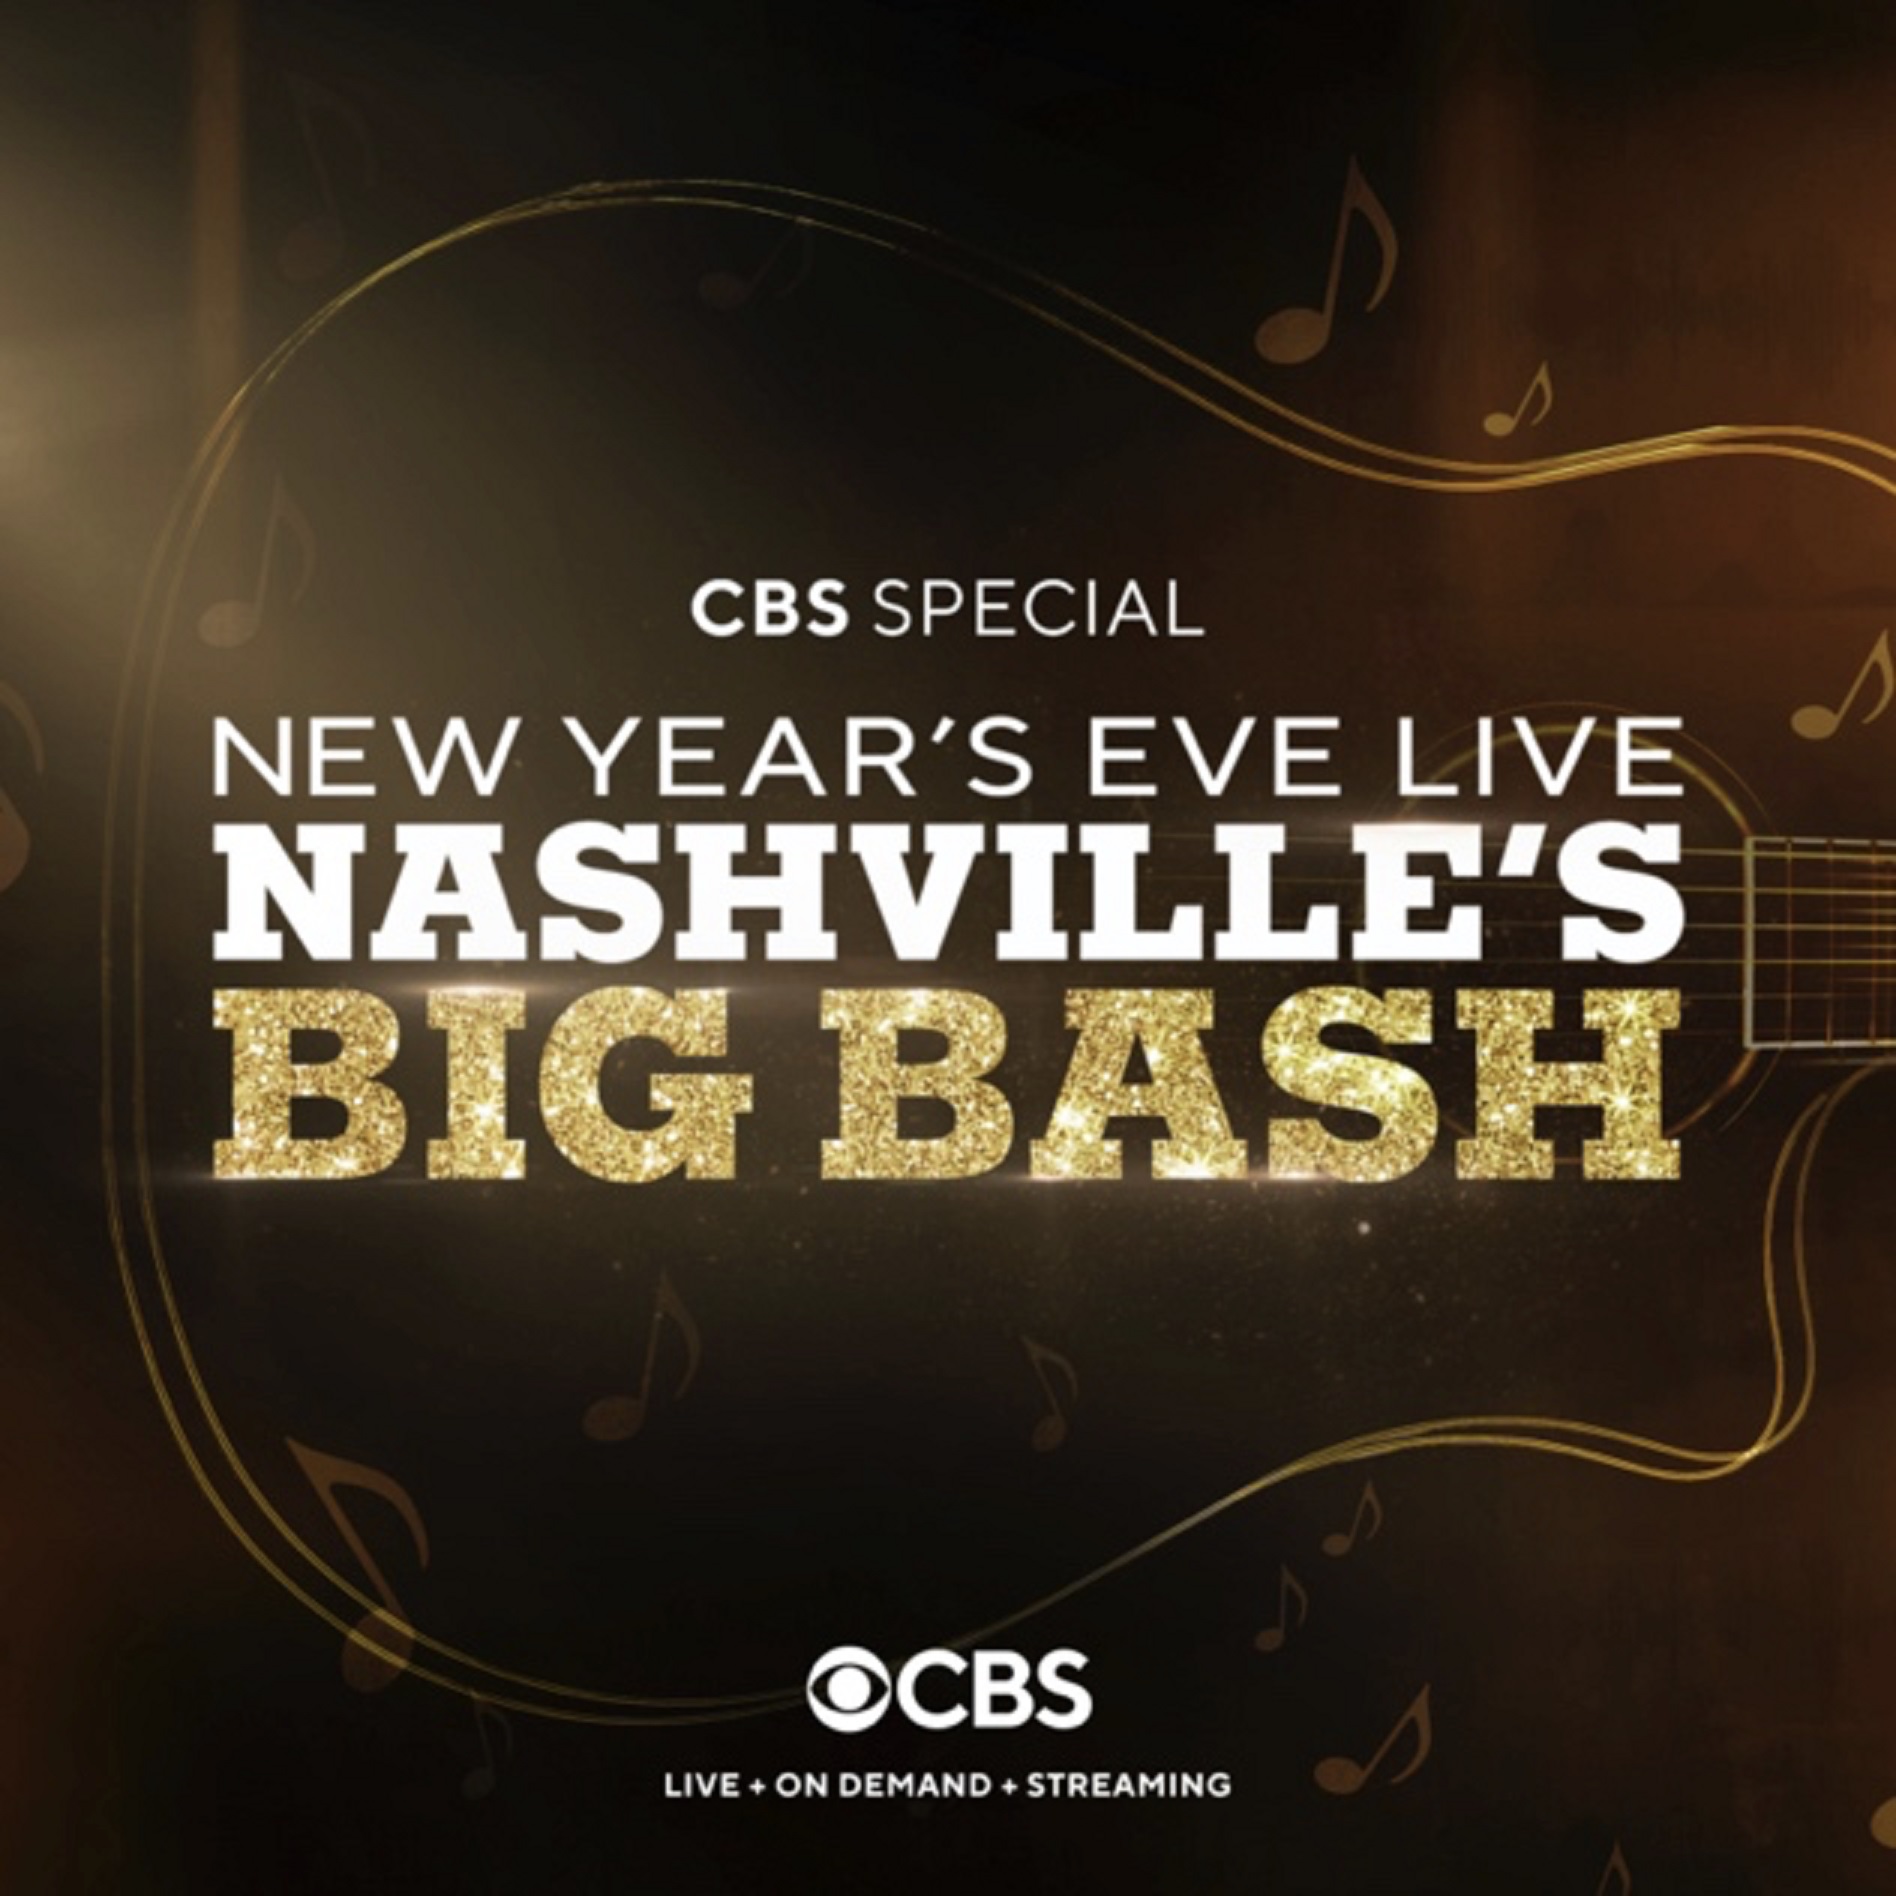 NEW YEAR’S EVE LIVE: NASHVILLE’S BIG BASH Reveals All-Star Collaborations